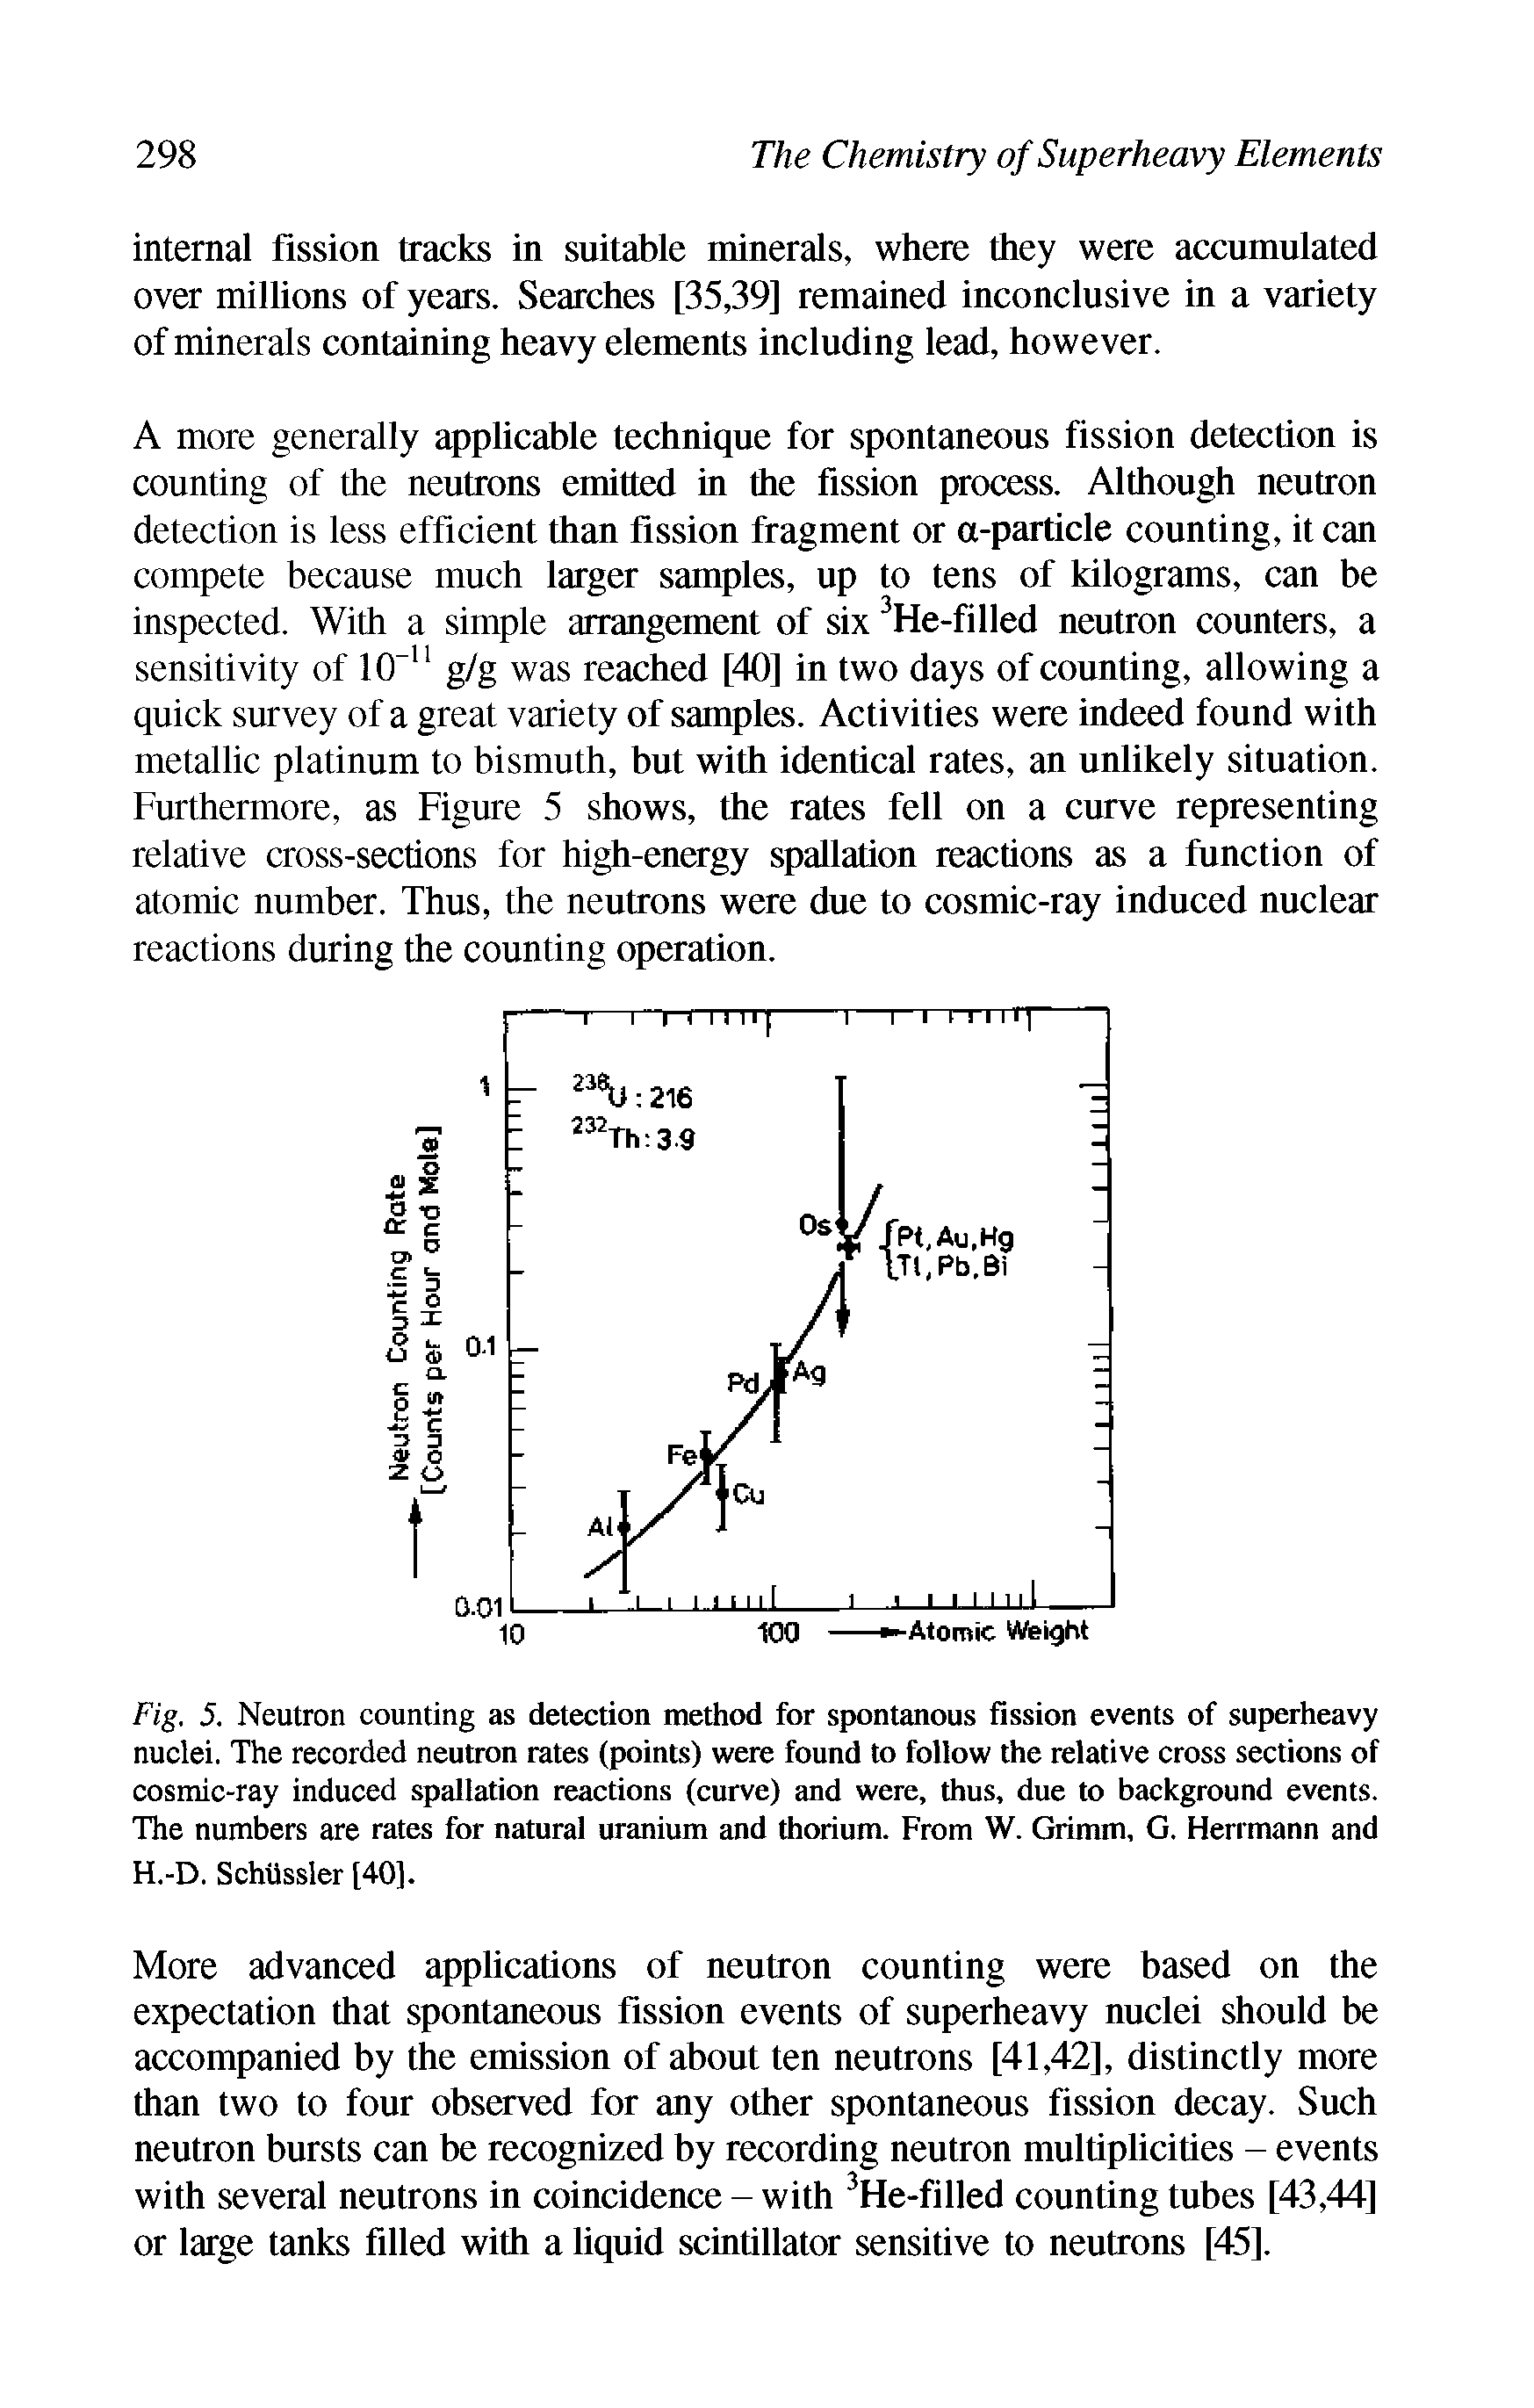 Fig. 5. Neutron counting as detection method for spontanous fission events of superheavy nuclei. The recorded neutron rates (points) were found to follow the relative cross sections of cosmic-ray induced spallation reactions (curve) and were, thus, due to background events. The numbers are rates for natural uranium and thorium. From W. Grimm, G. Herrmann and H.-D. Schiissler [40].